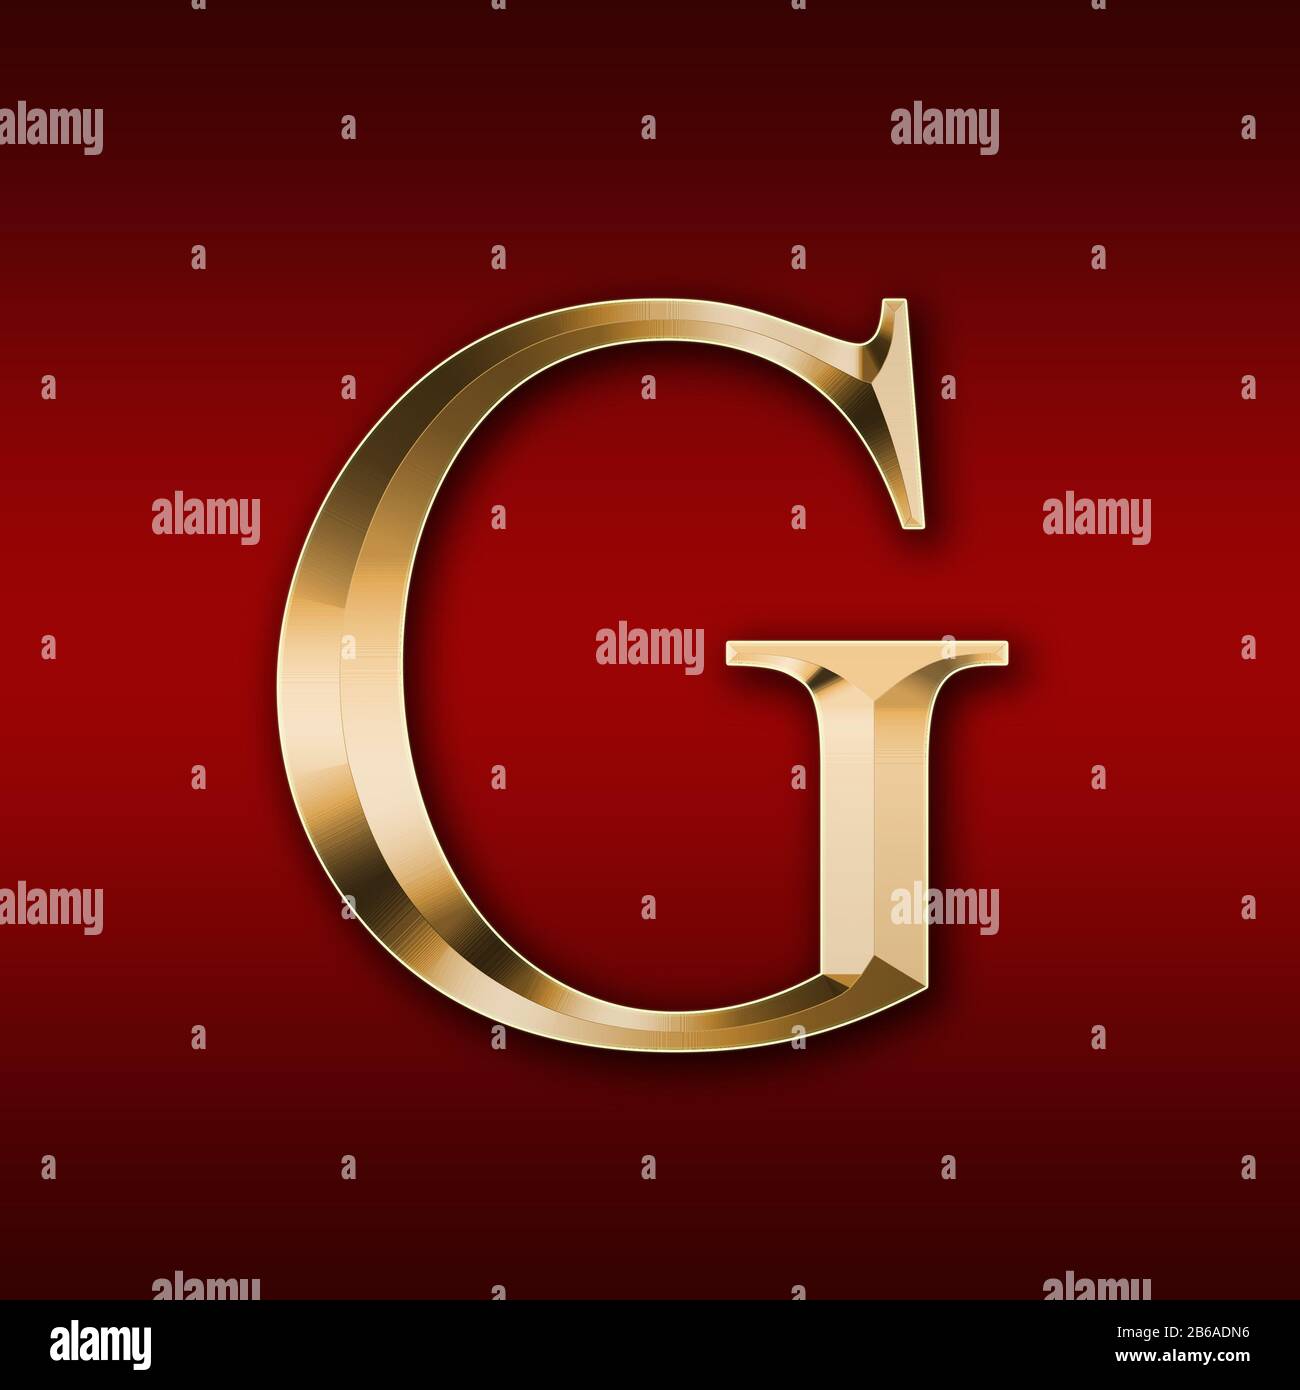 Gold letter 'G' on a red background Stock Photo